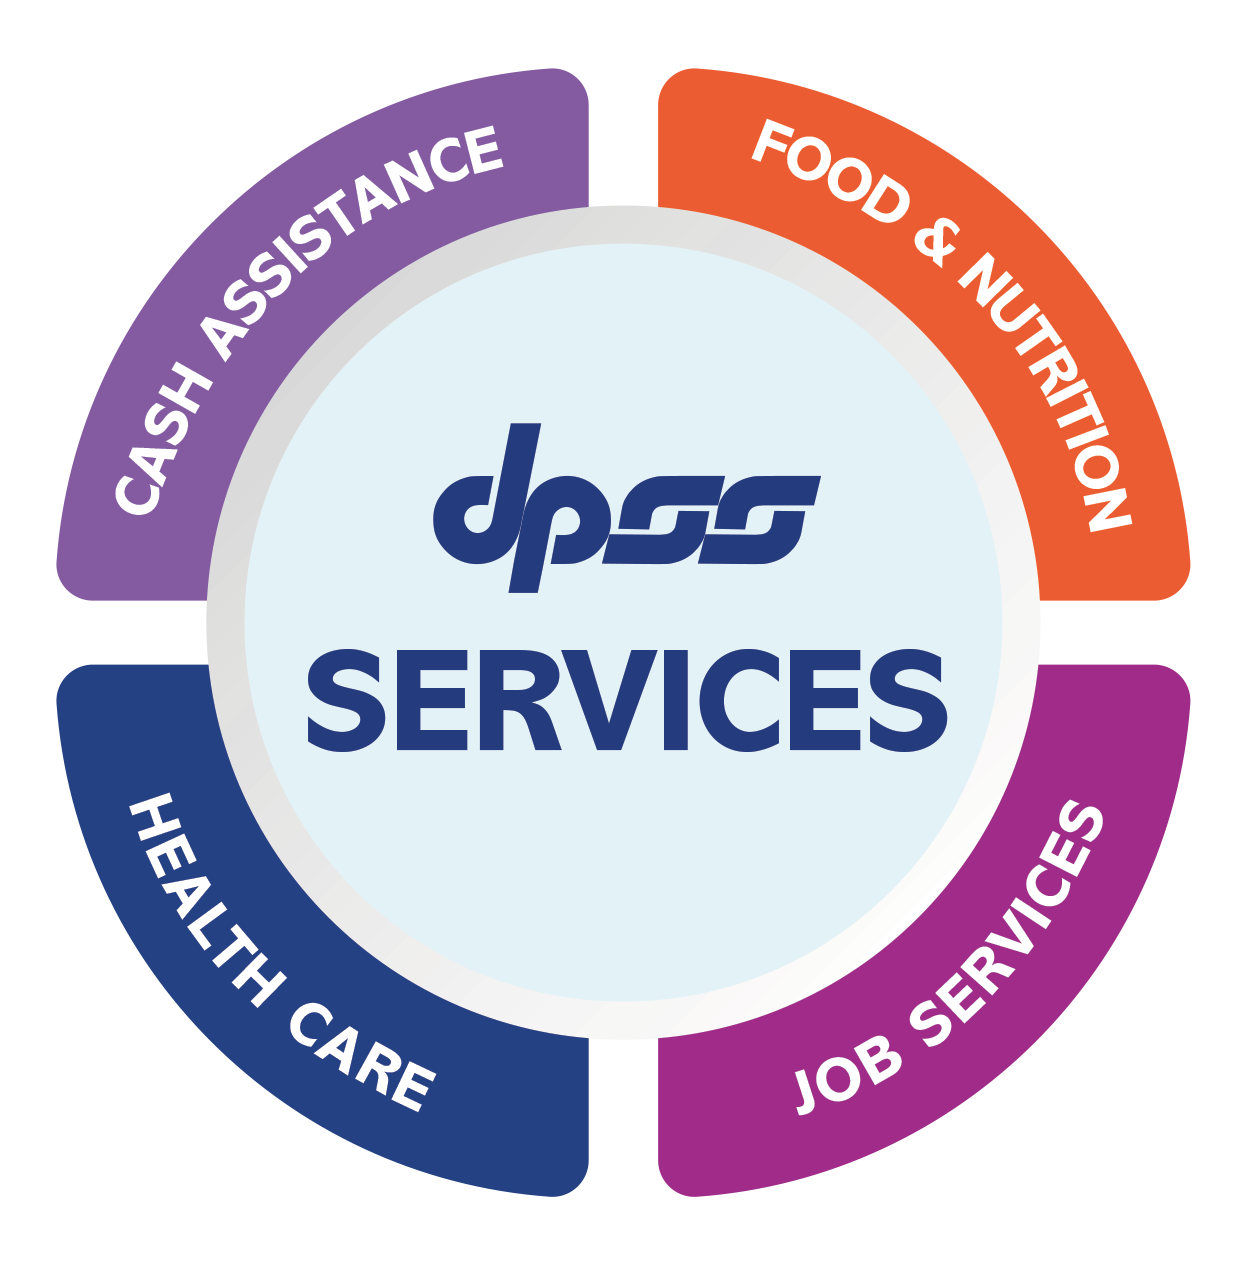 DPSS Services chart includes Cash Assistance, Food and Nutrition, Job Services, Health Care.